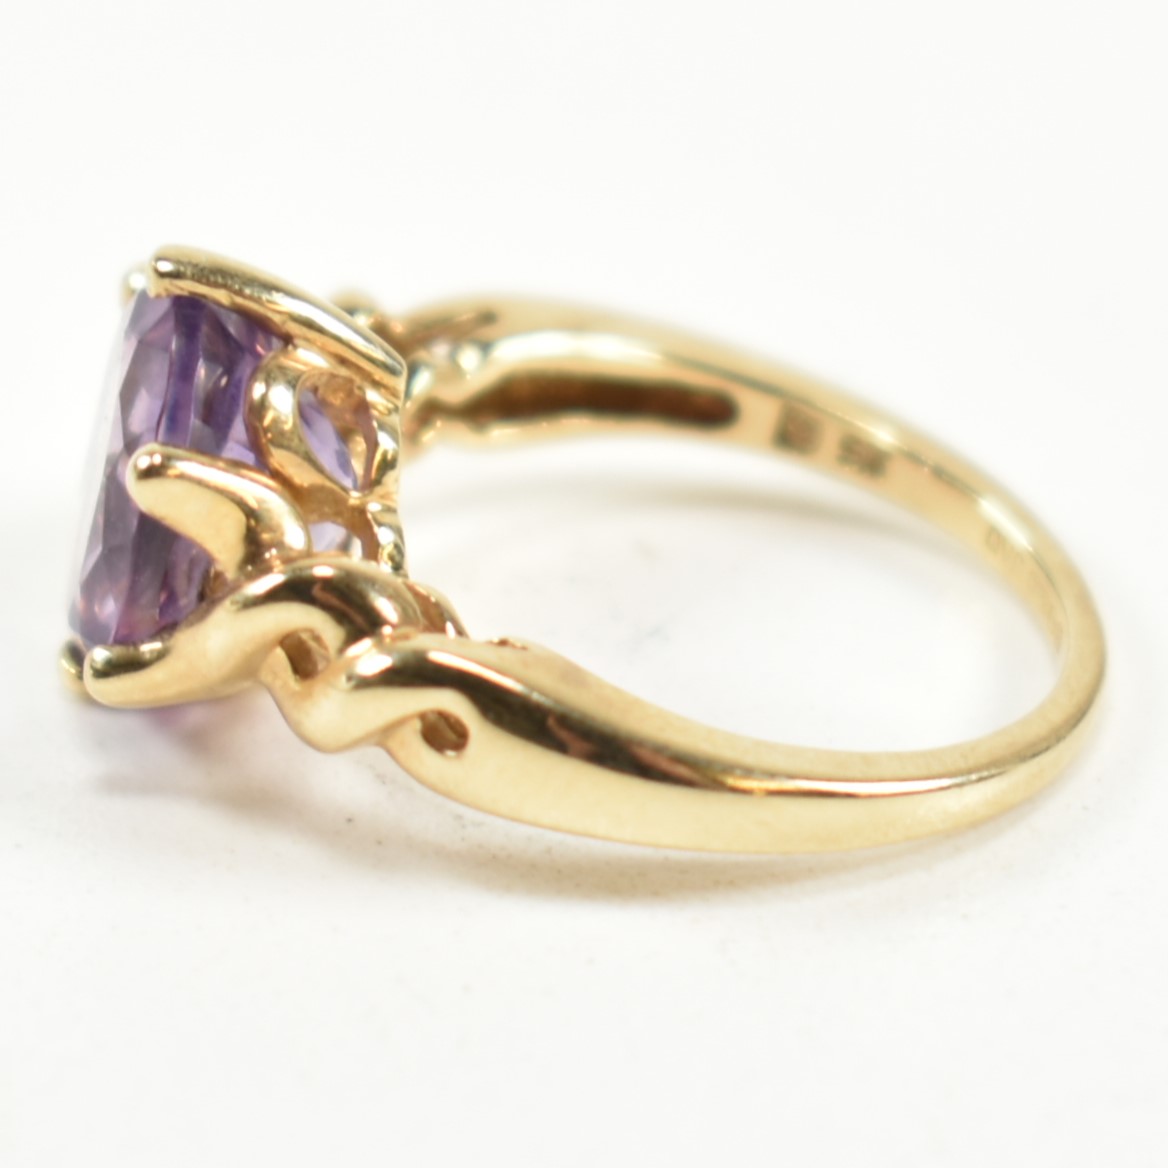 HALLMARKED 9CT GOLD & AMETHYST RING - Image 8 of 9